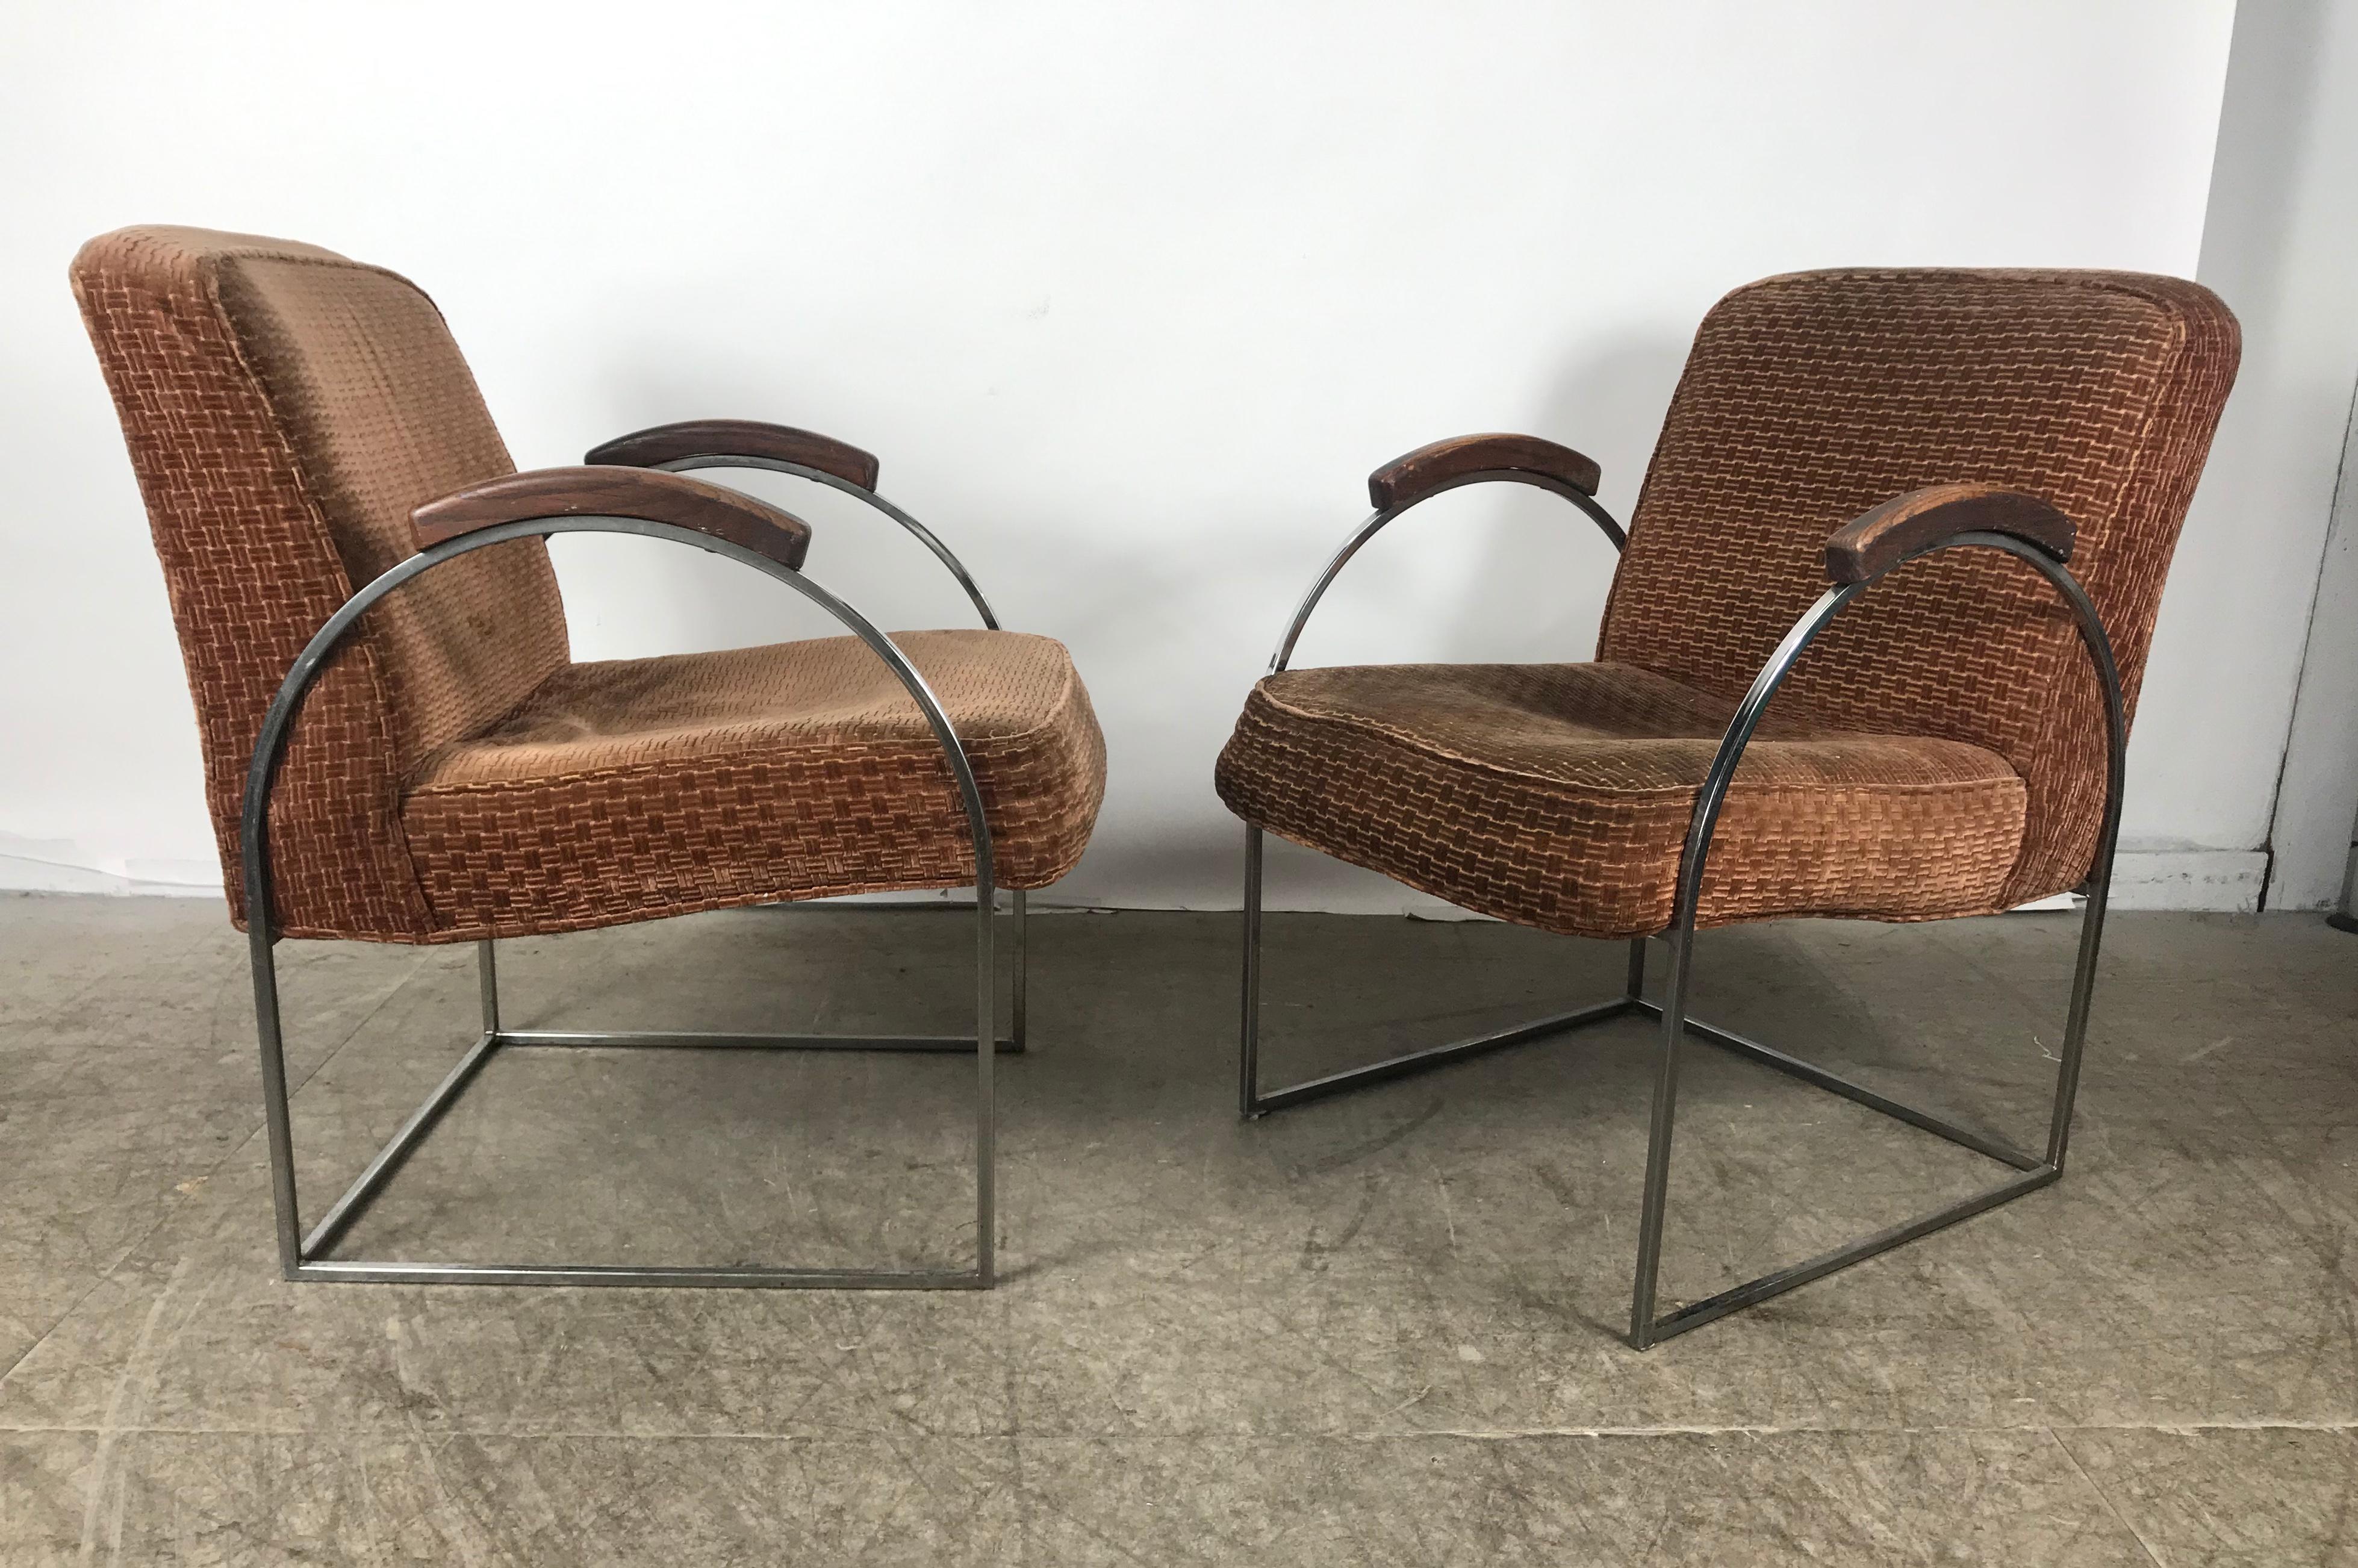 Matched pair of Bauhaus style lounge chairs designed by Milo Baughman, retains original cut mohair fabric, perfect patina to wood armrests. Extremely comfortable, hand delivery avail to New York City or anywhere en route from Buffalo New York.